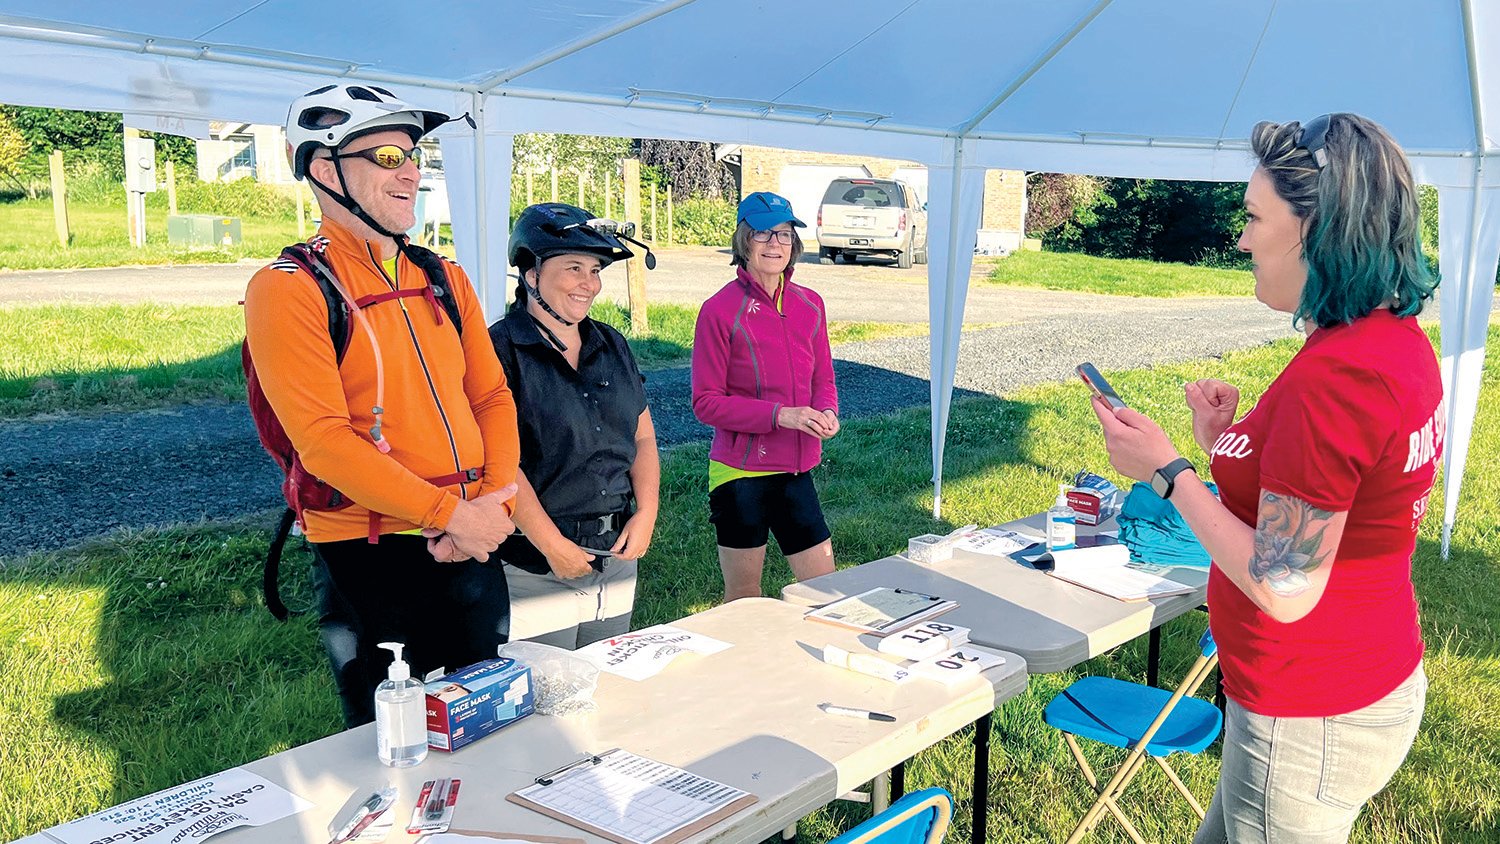 Riders and staff exchange a smile at the Ride the Willapa check-in tent at Owl & Olive near Pe Ell.